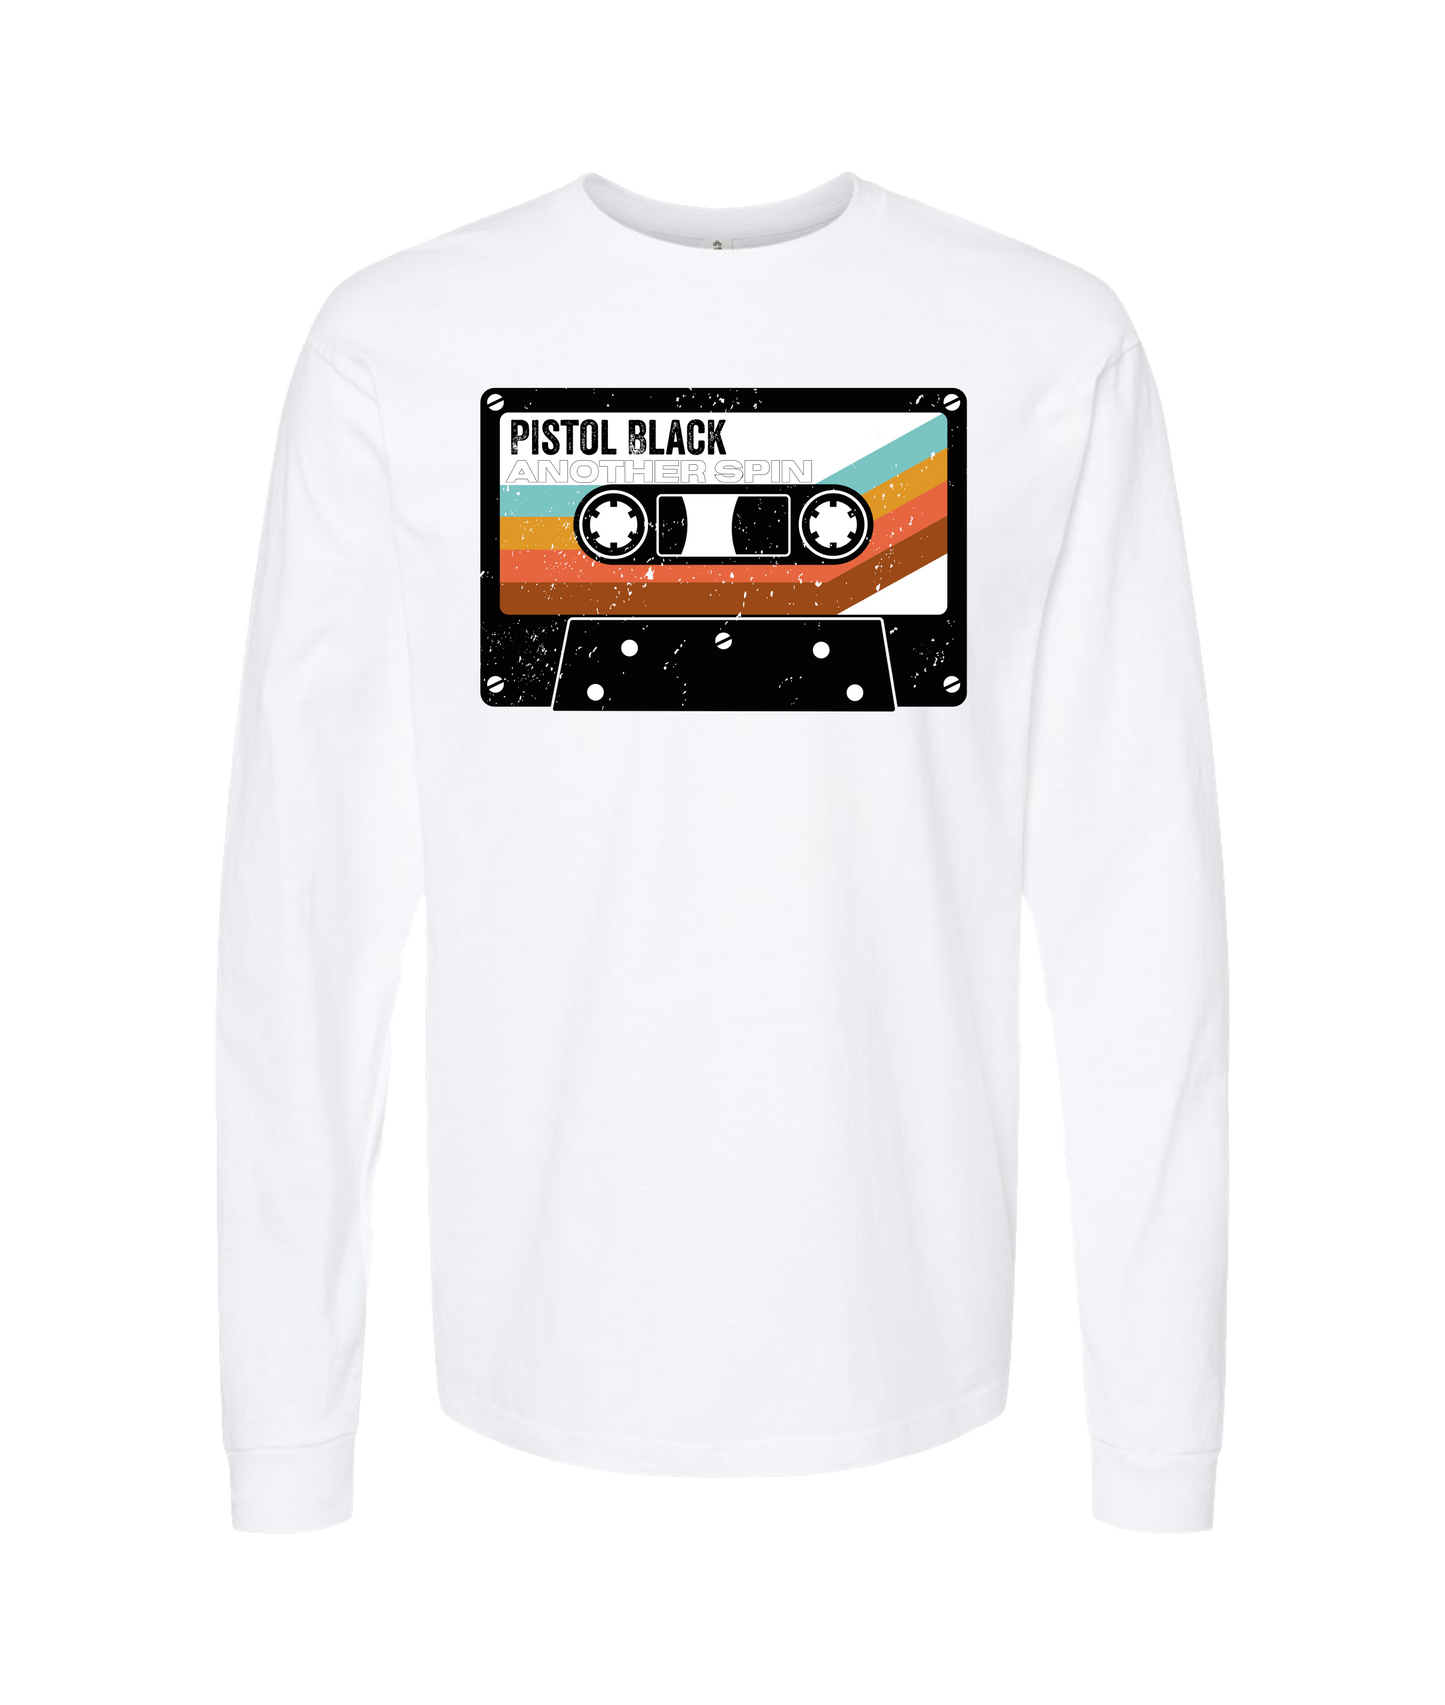 Pistol Black - Another Spin - White Long Sleeve T